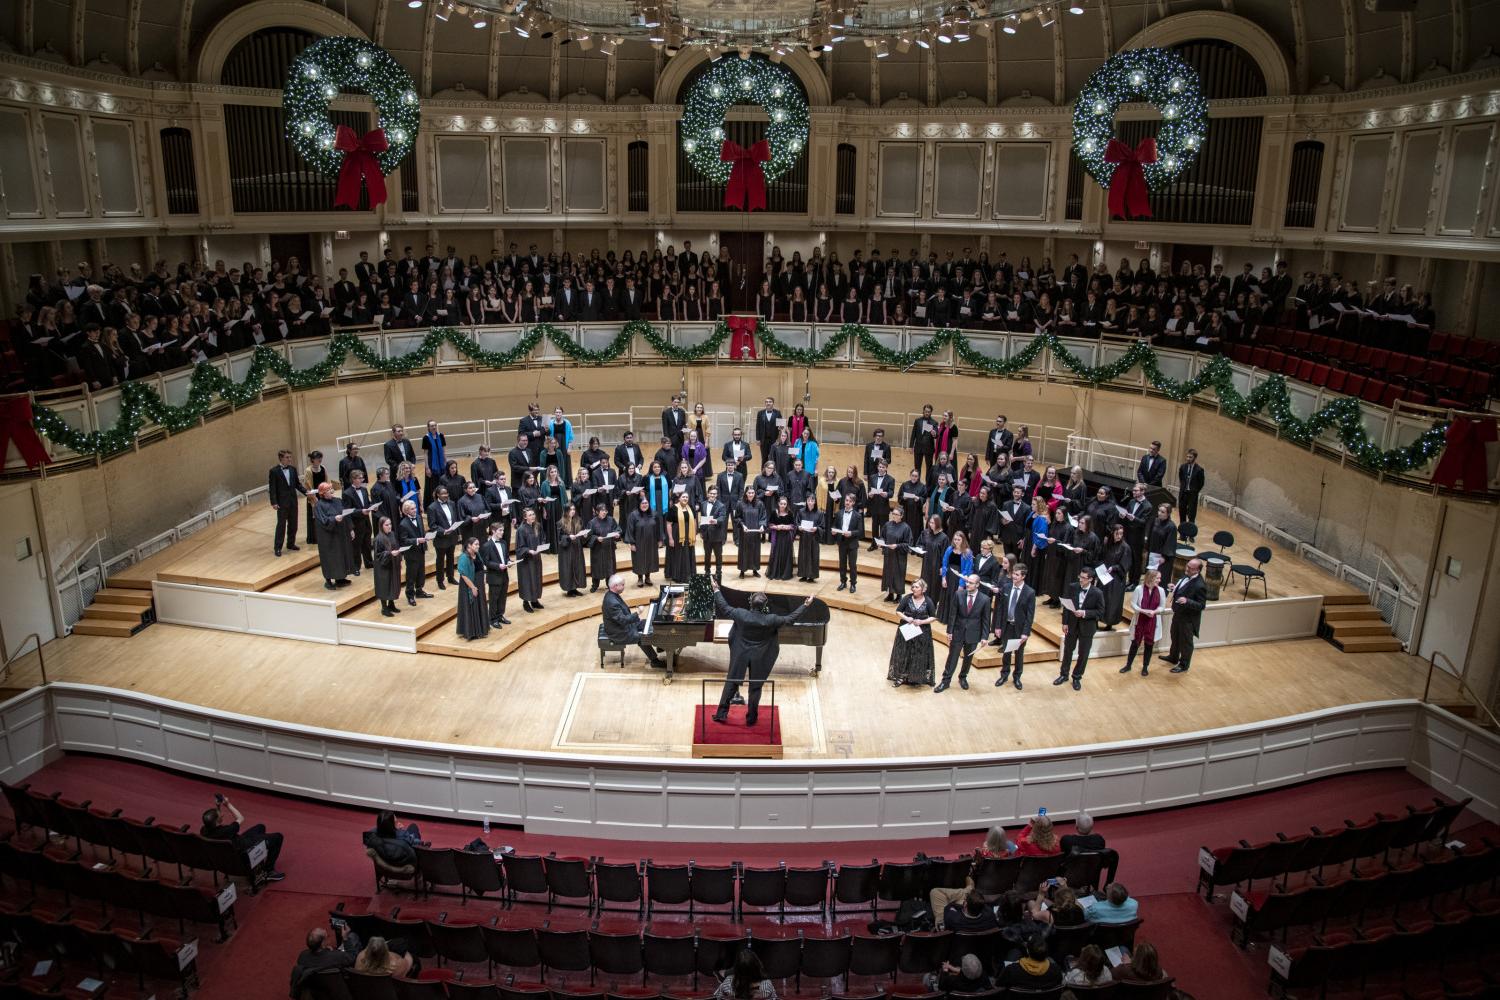 The <a href='http://yhc.hwanfei.com'>bv伟德ios下载</a> Choir performs in the Chicago Symphony Hall.